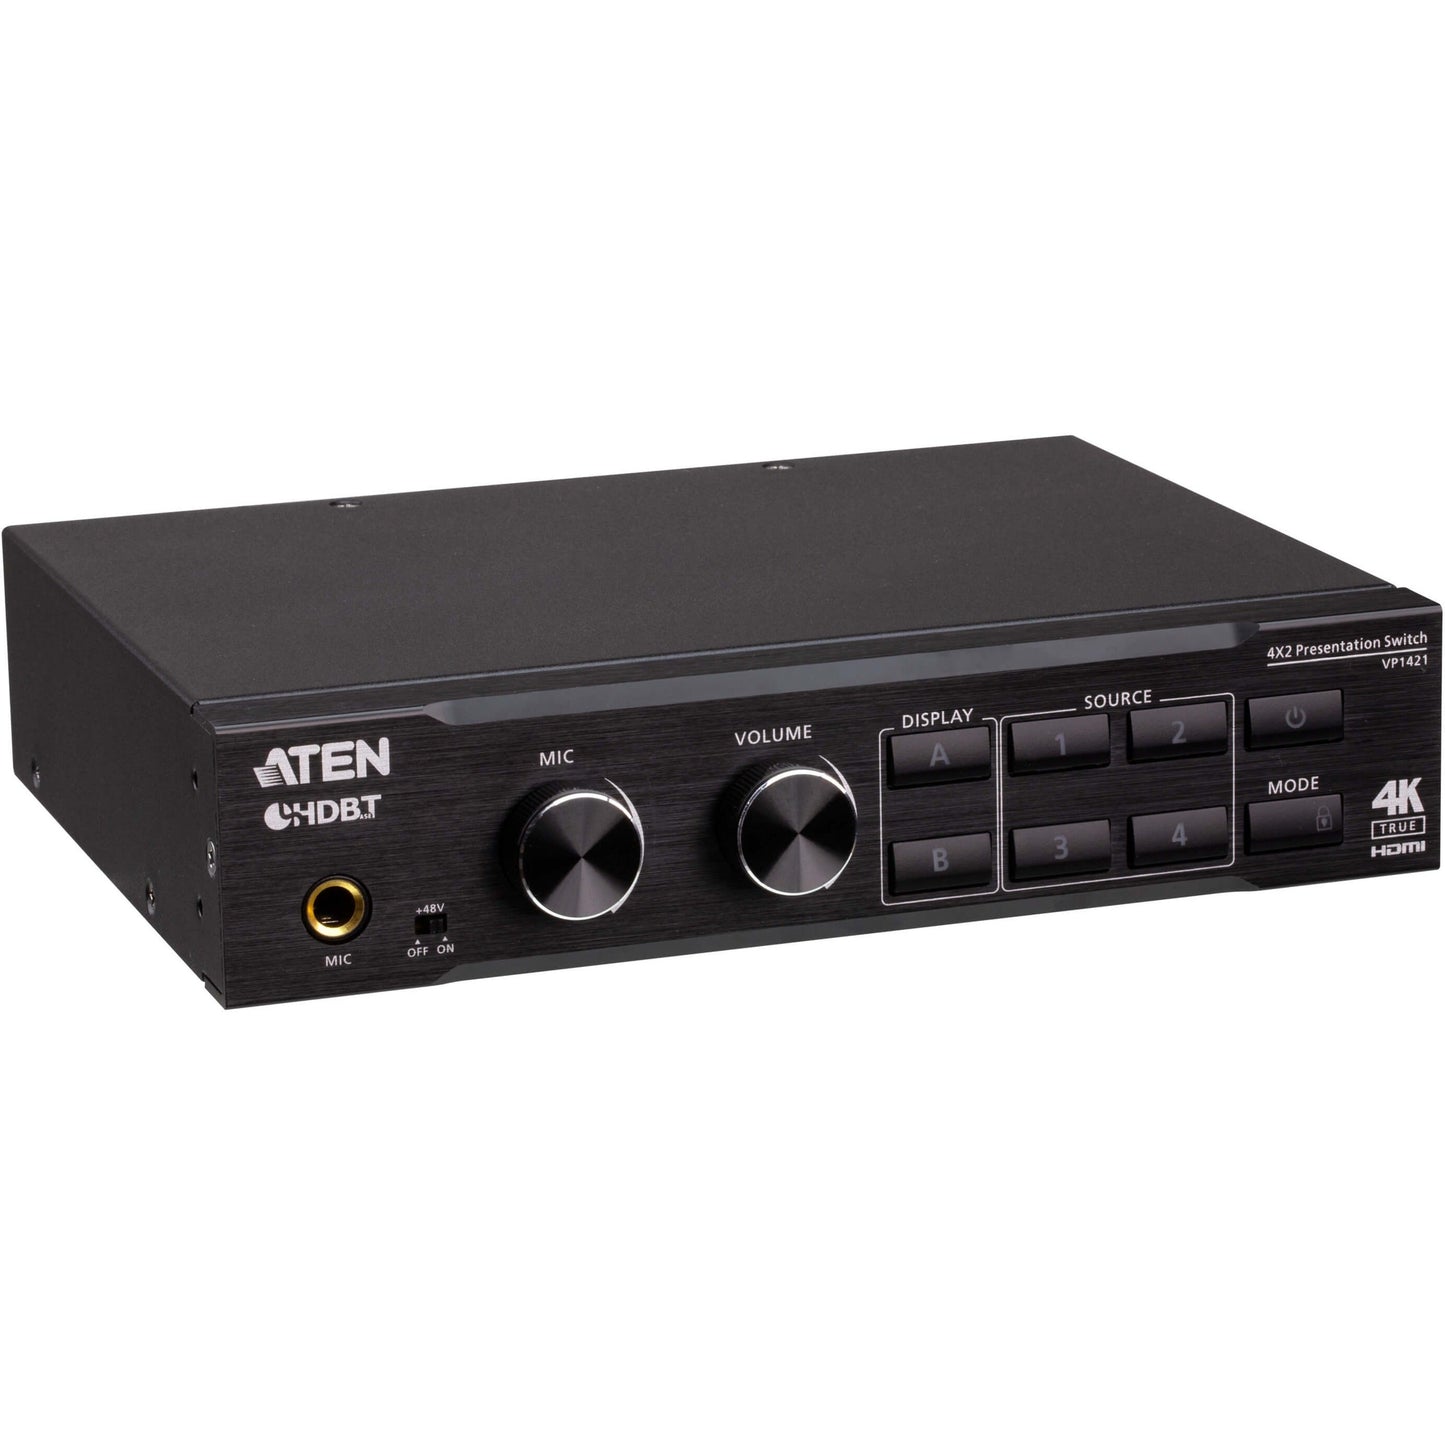 ATEN 4 x 2 True 4K Presentation Matrix Switch with Scaling DSP and HDBaseT-Lite